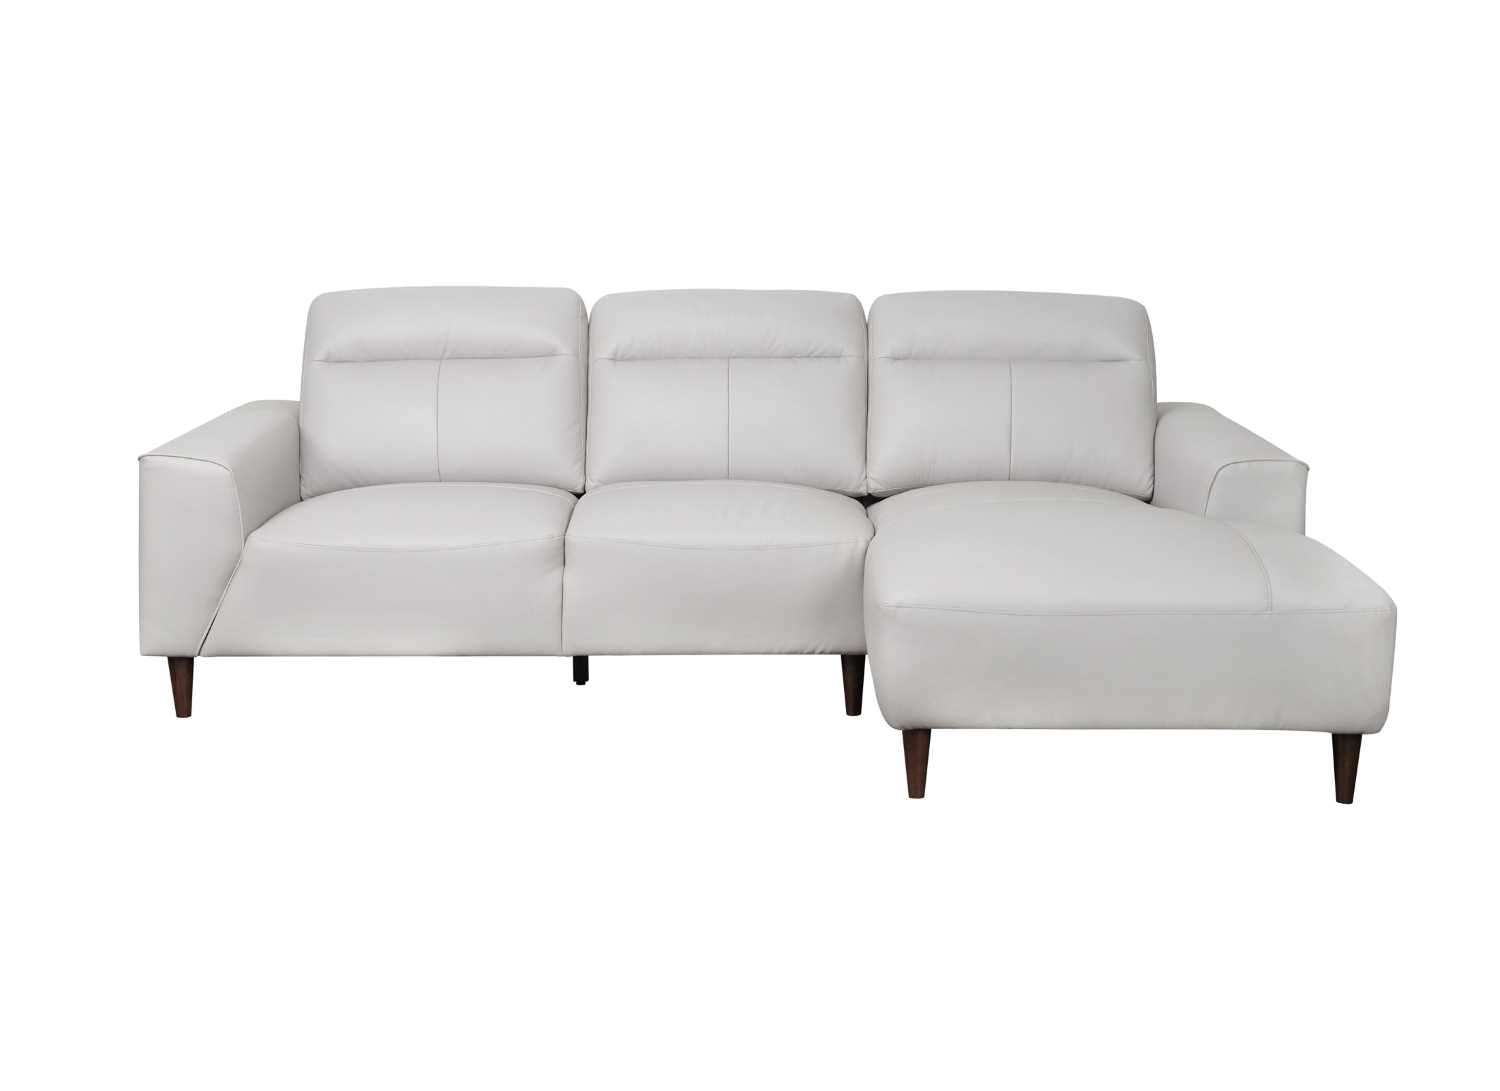 Trevelyn Top-Grain Cow Leather Sectional Sofa With Right Side Chaise 99995